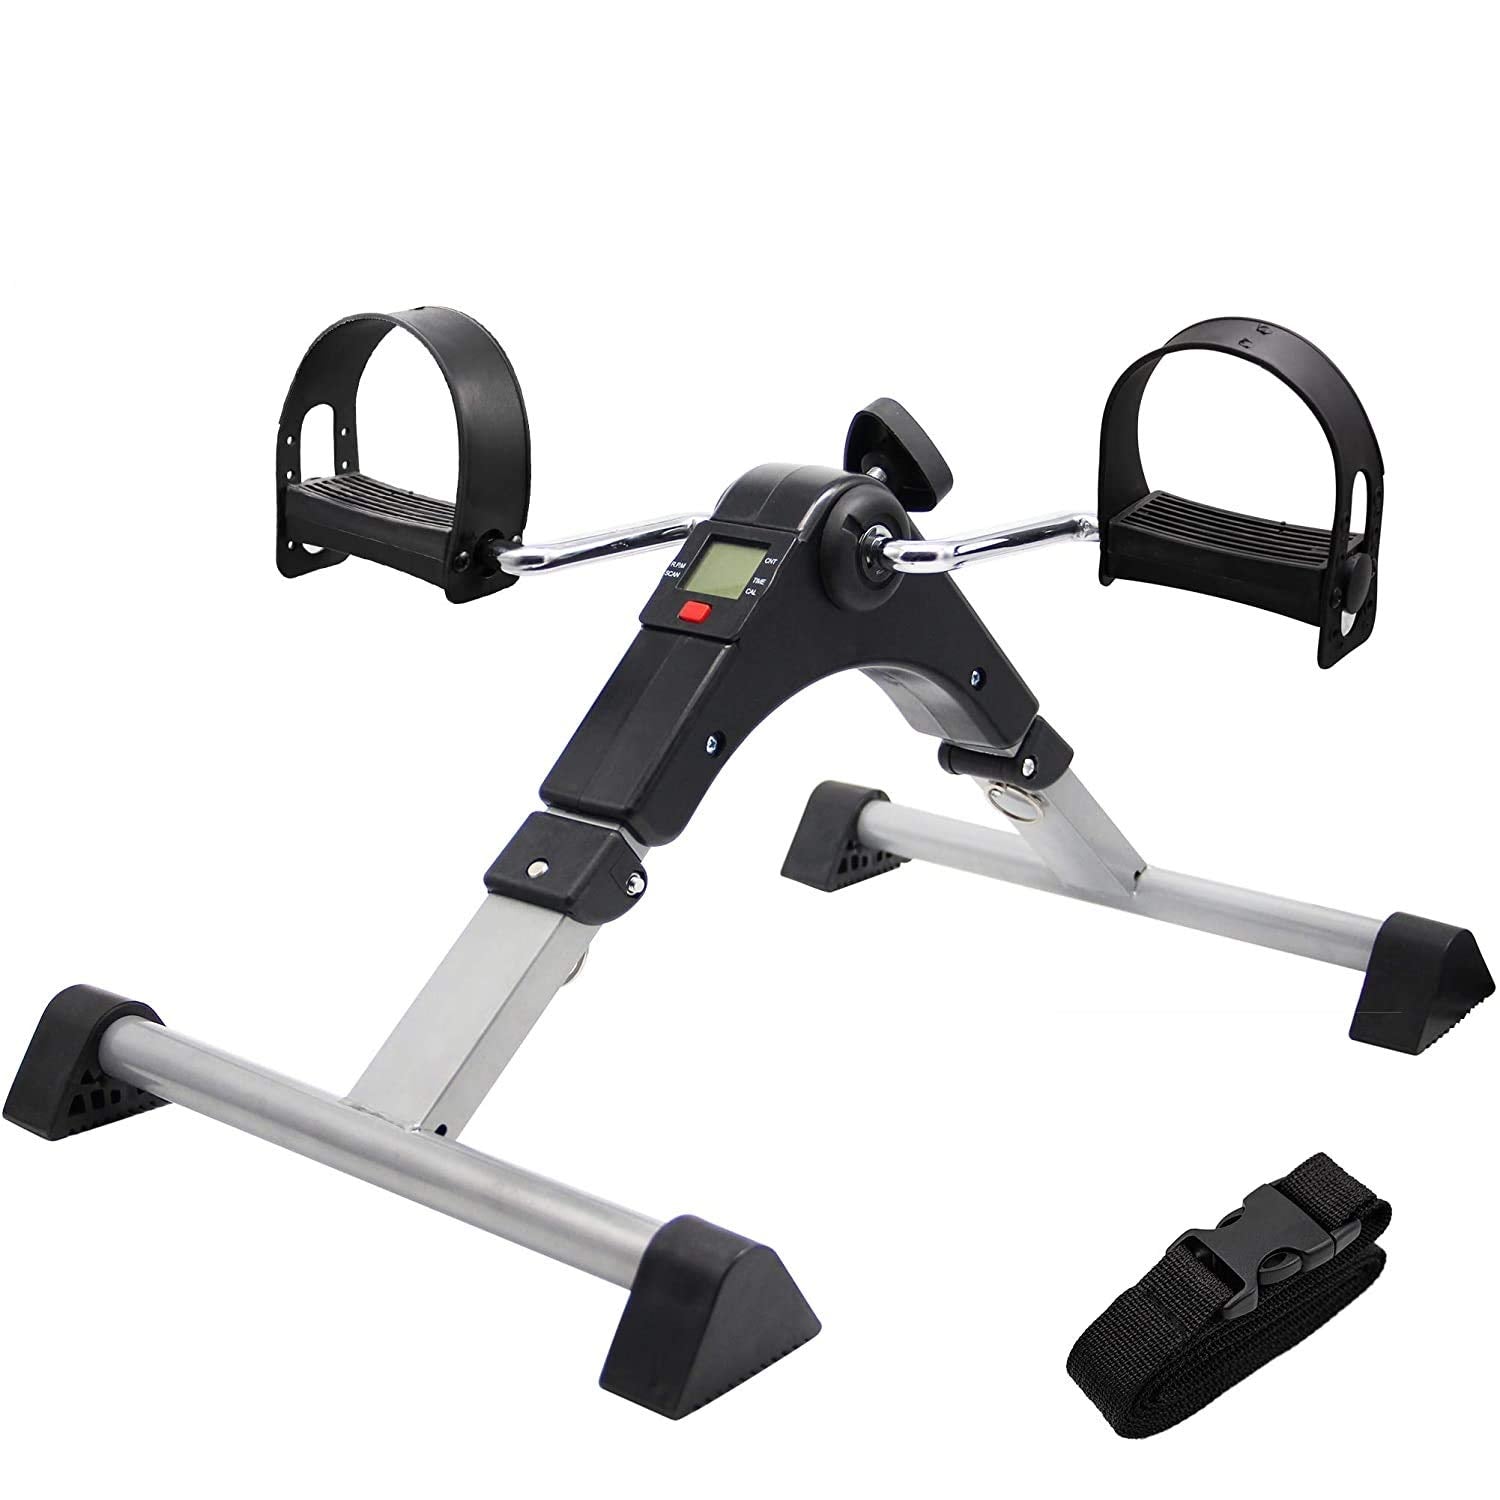 Mini Digital Fitness Cycle - Portable Cycle Exerciser